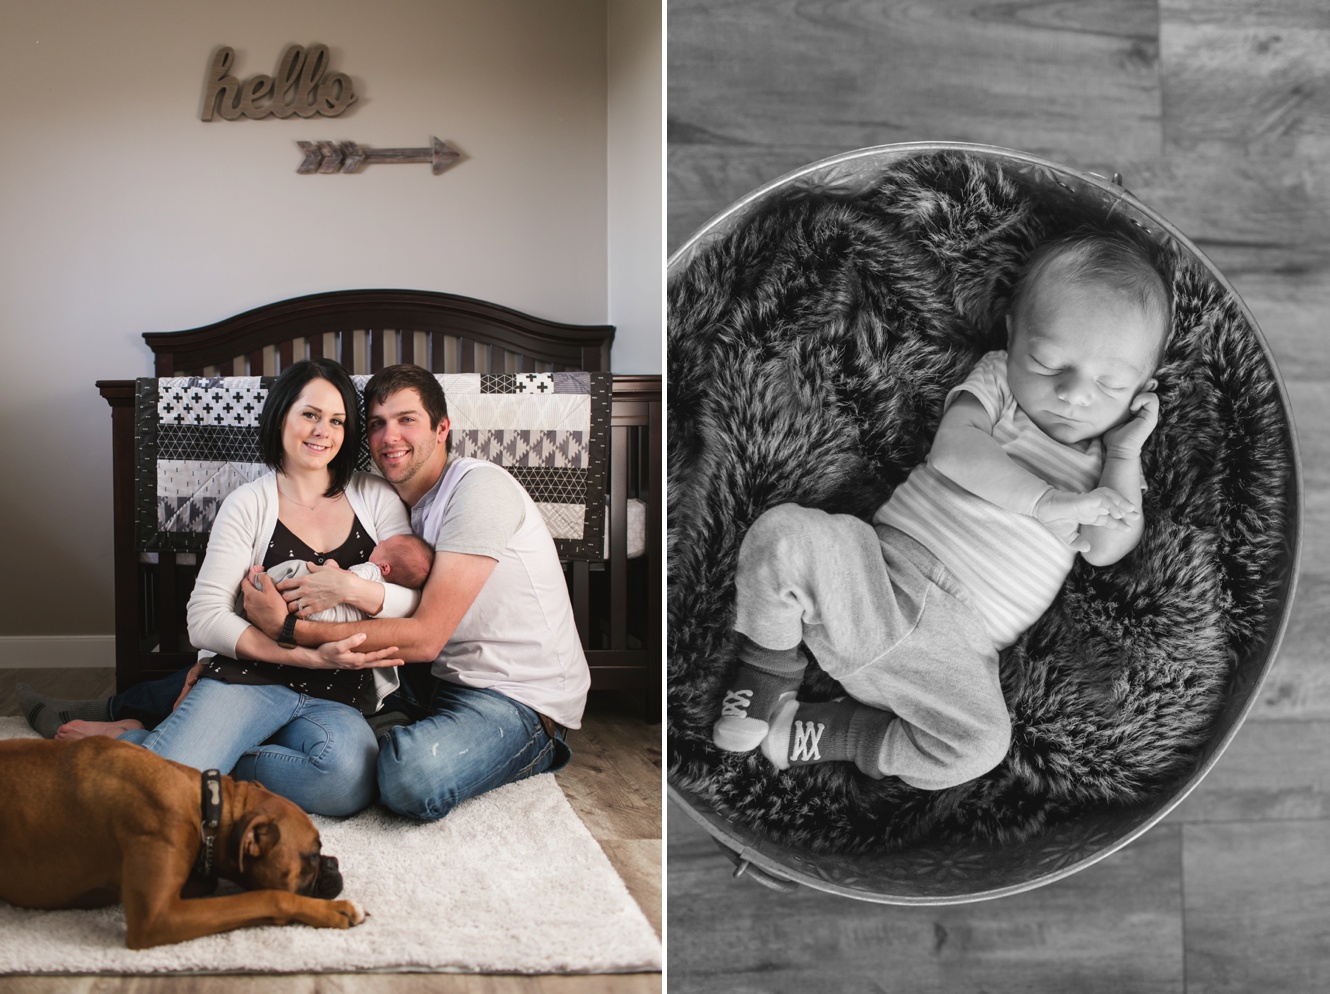 Carlyle newborn photography session at home